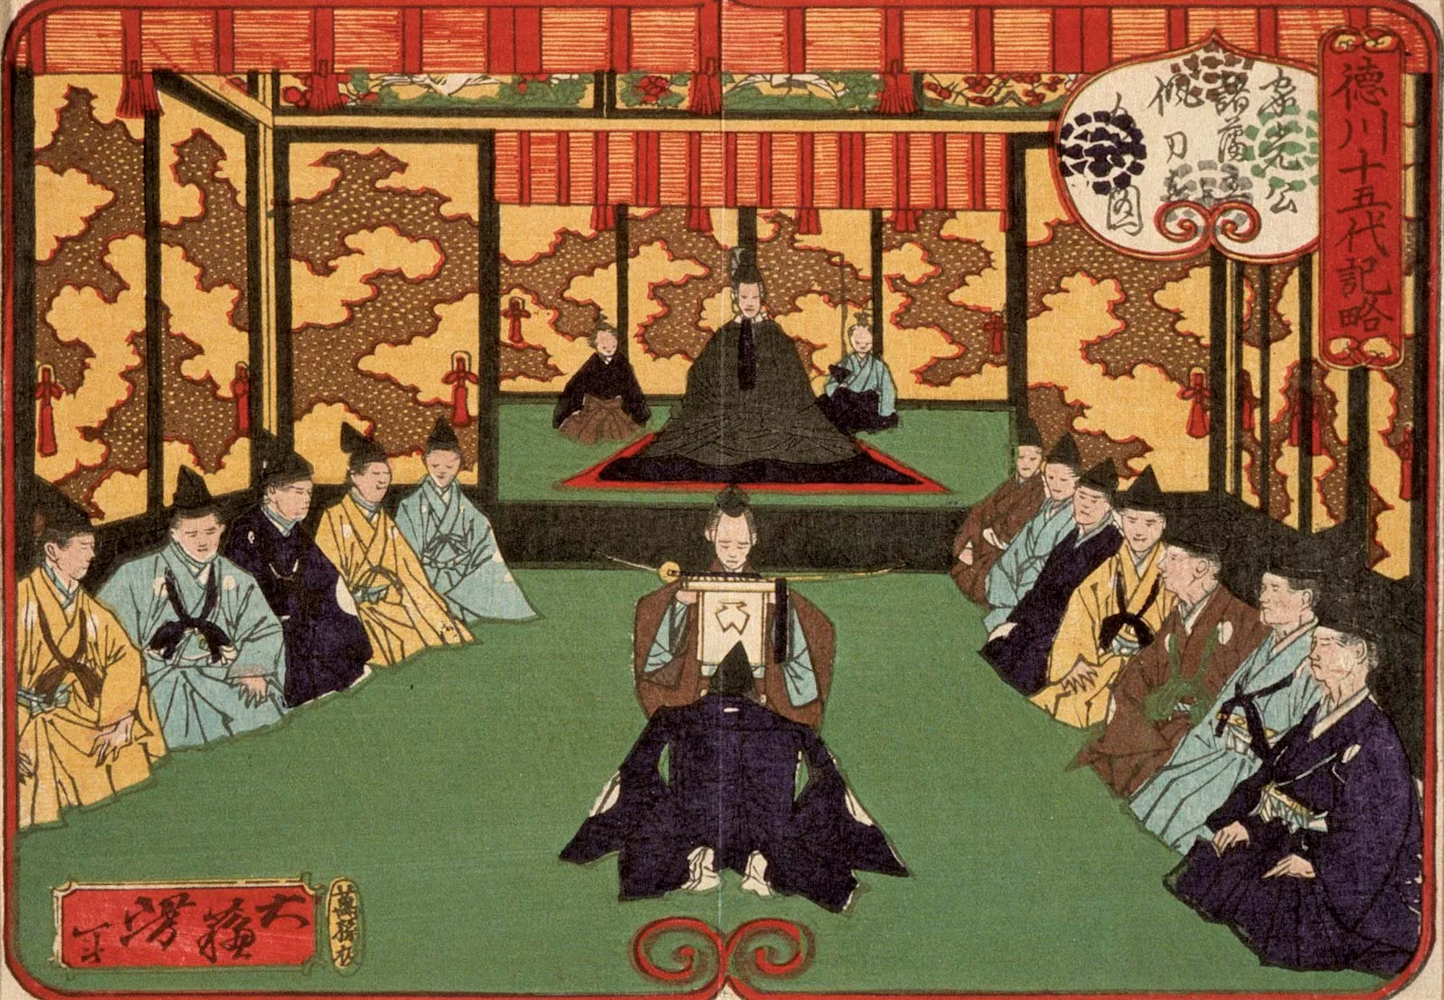 A historic Japanese painting showing Tokugawa Ieyasu and feudal lords gathered around a table in court.